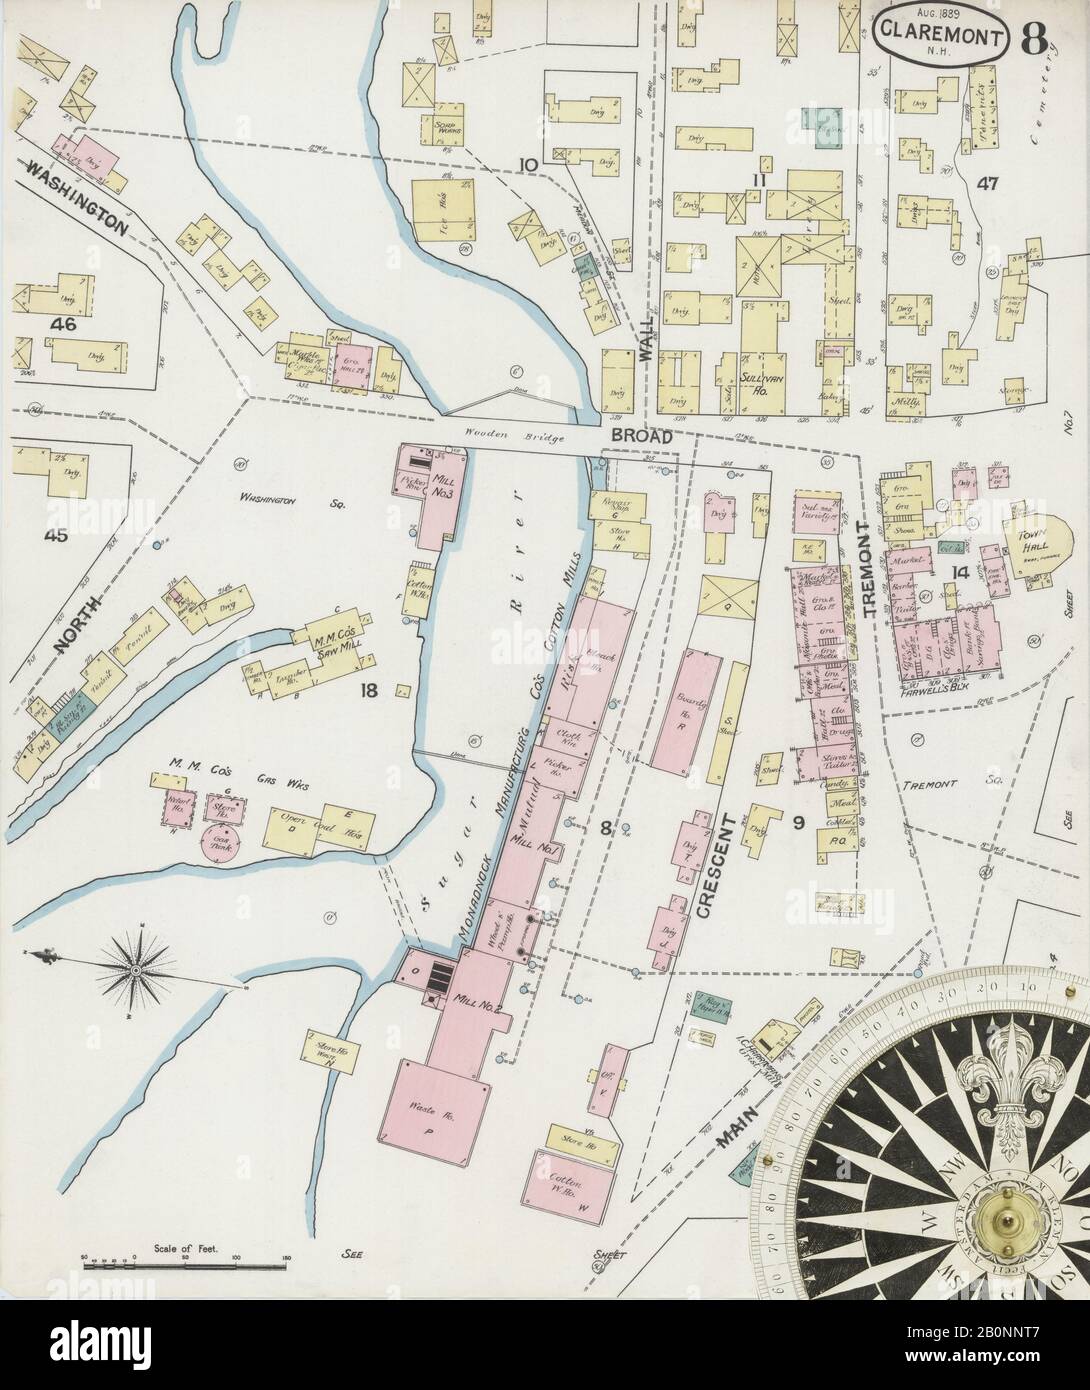 Image 8 of Sanborn Fire Insurance Map from Claremont, Sullivan County, New Hampshire. Aug 1889. 8 Sheet(s), America, street map with a Nineteenth Century compass Stock Photo